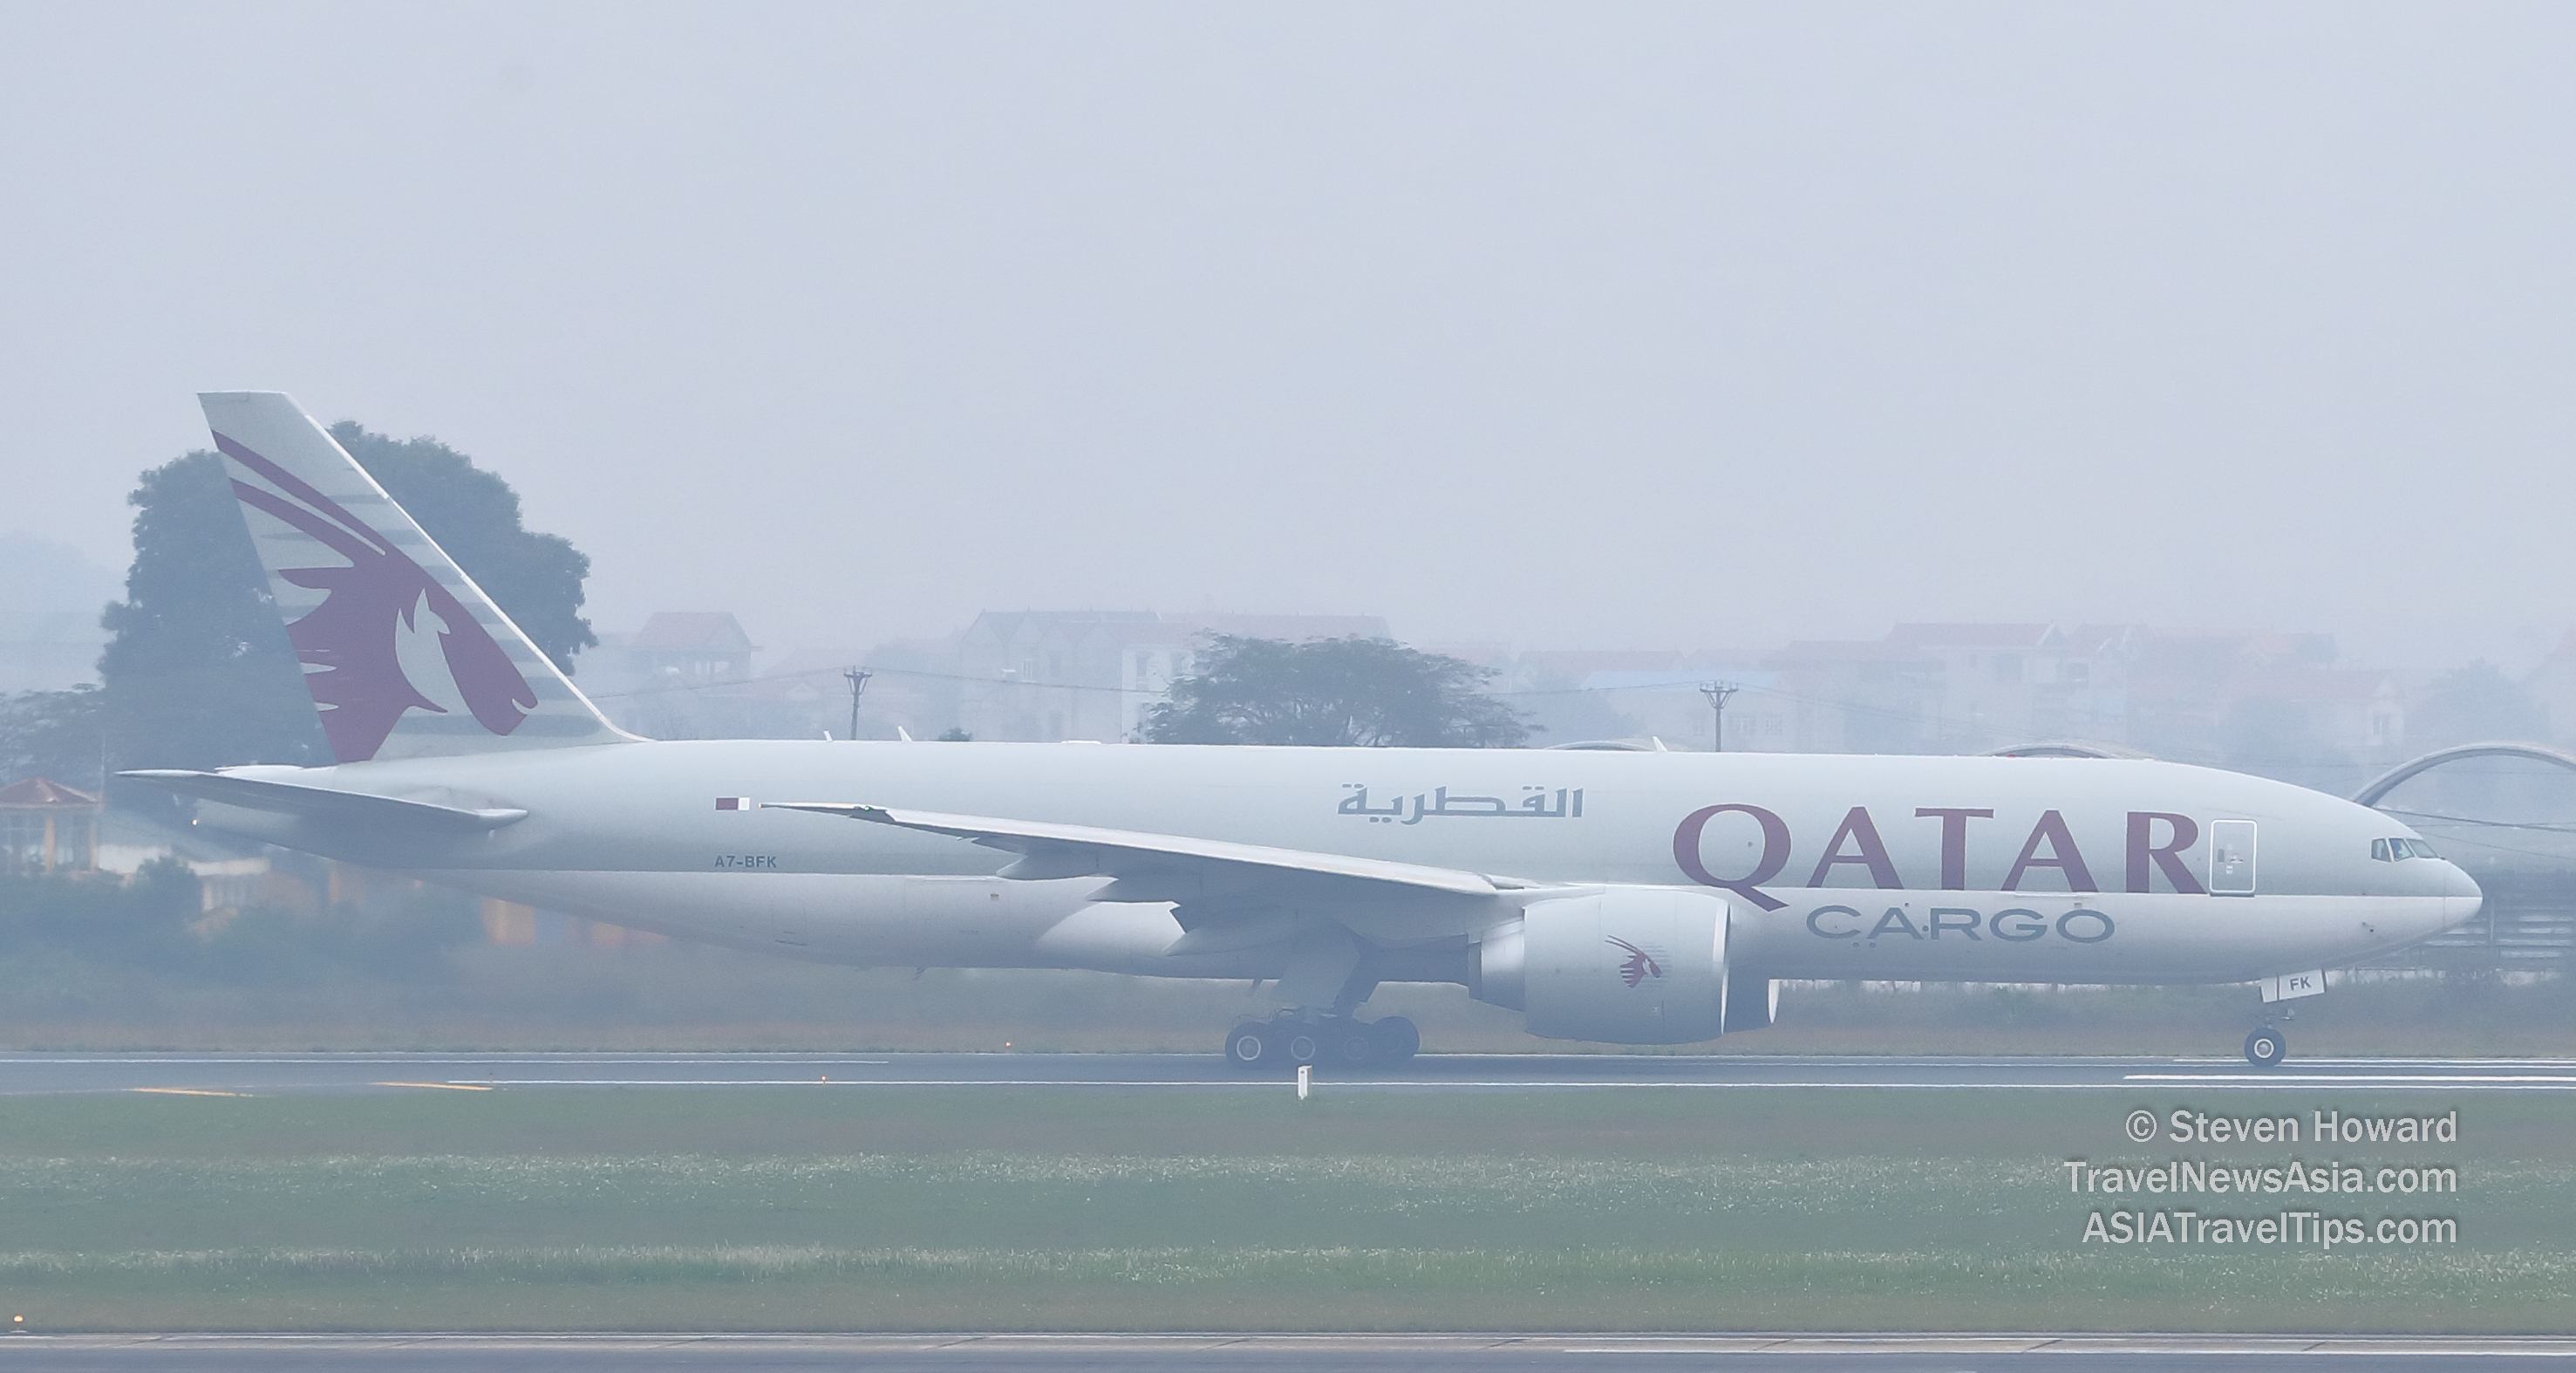 Qatar Airways Cargo Boeing 777F reg: A7-BFK on a very foggy day in Hanoi, Vietnam. Picture by Steven Howard of TravelNewsAsia.com Click to enlarge.